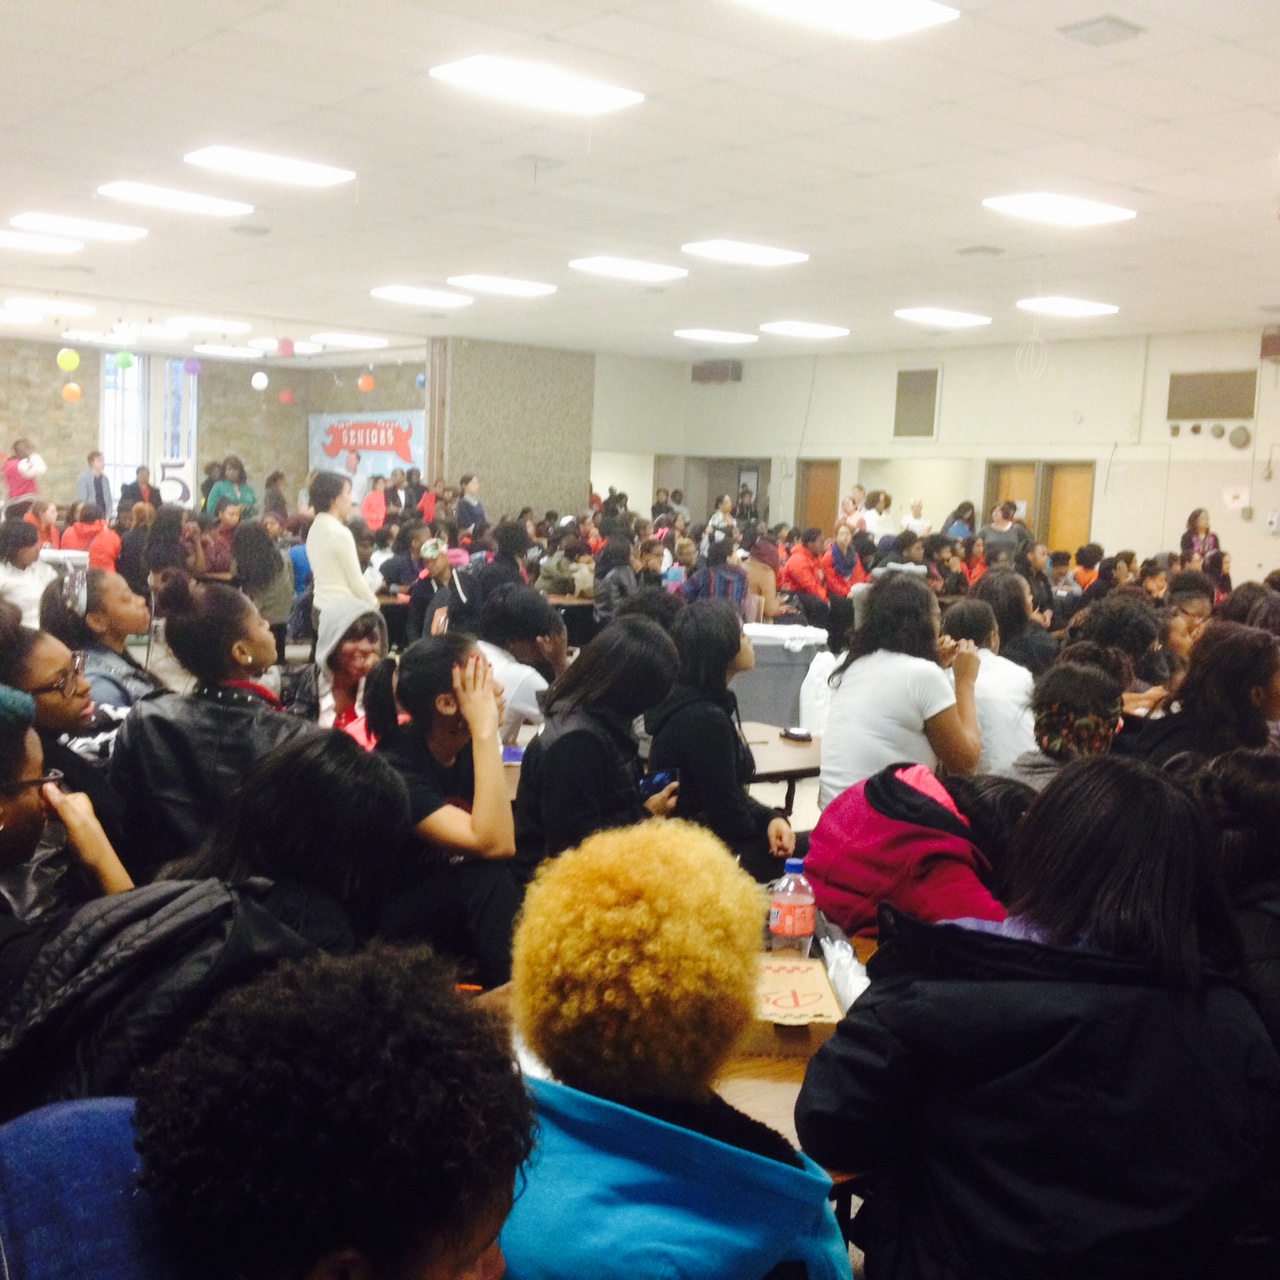 Students sit-in at Western High School in Baltimore, Md. on Nov. 26, 2014. (photo credit: Moraa Nyamboga)